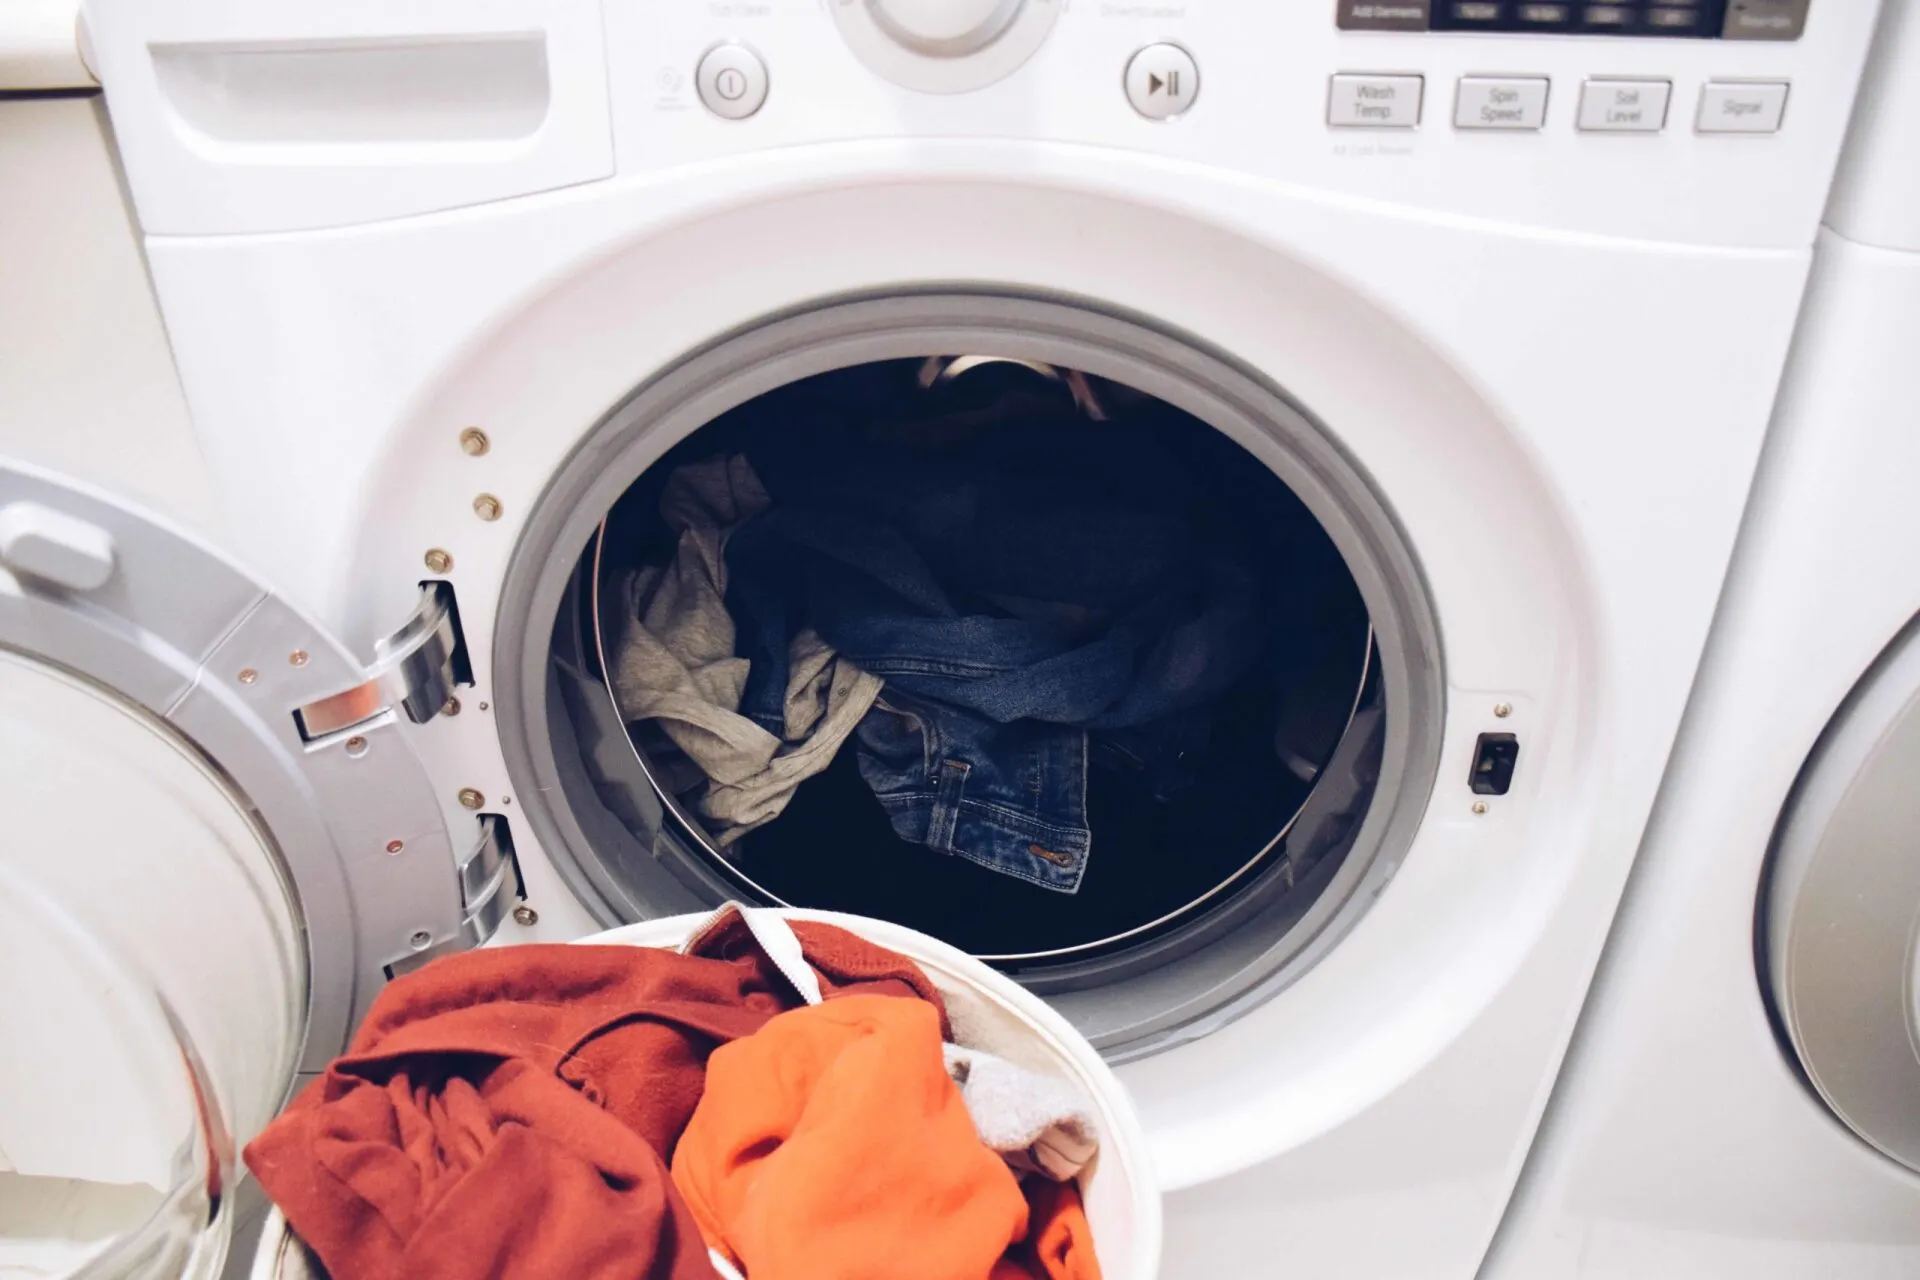 Dryer Repair Services in Jacksonville, FL: Keeping Your Laundry Routine Running Smoothly